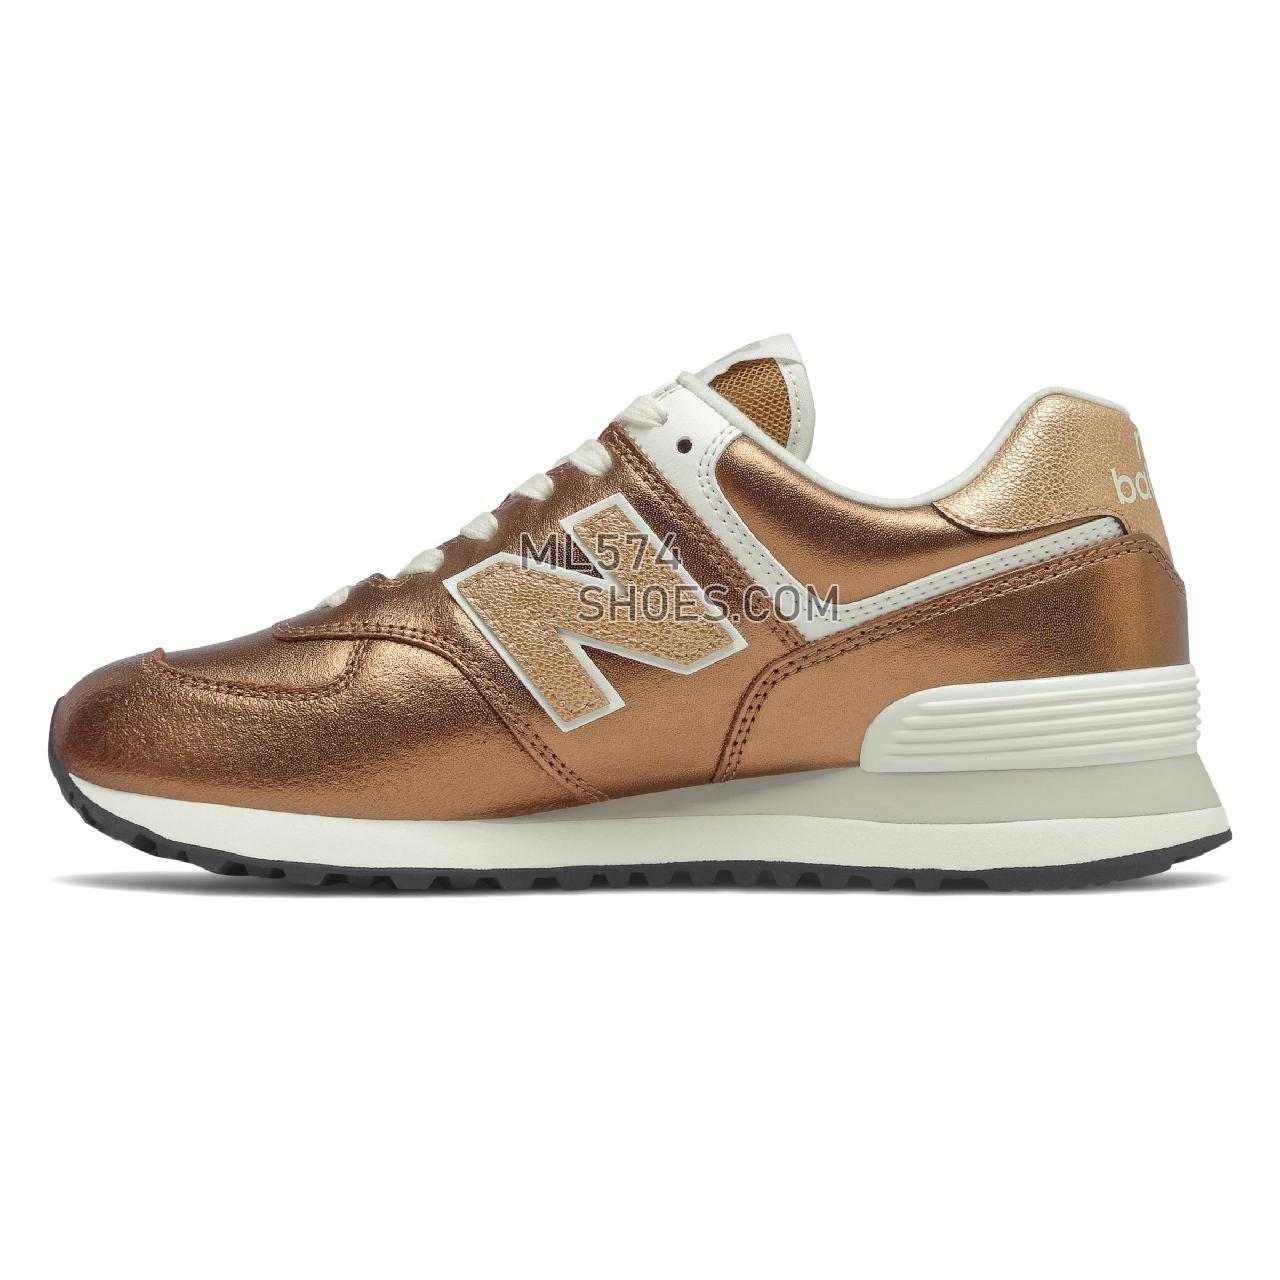 New Balance 574 - Women's Classic Sneakers - Copper with White - WL574PT2